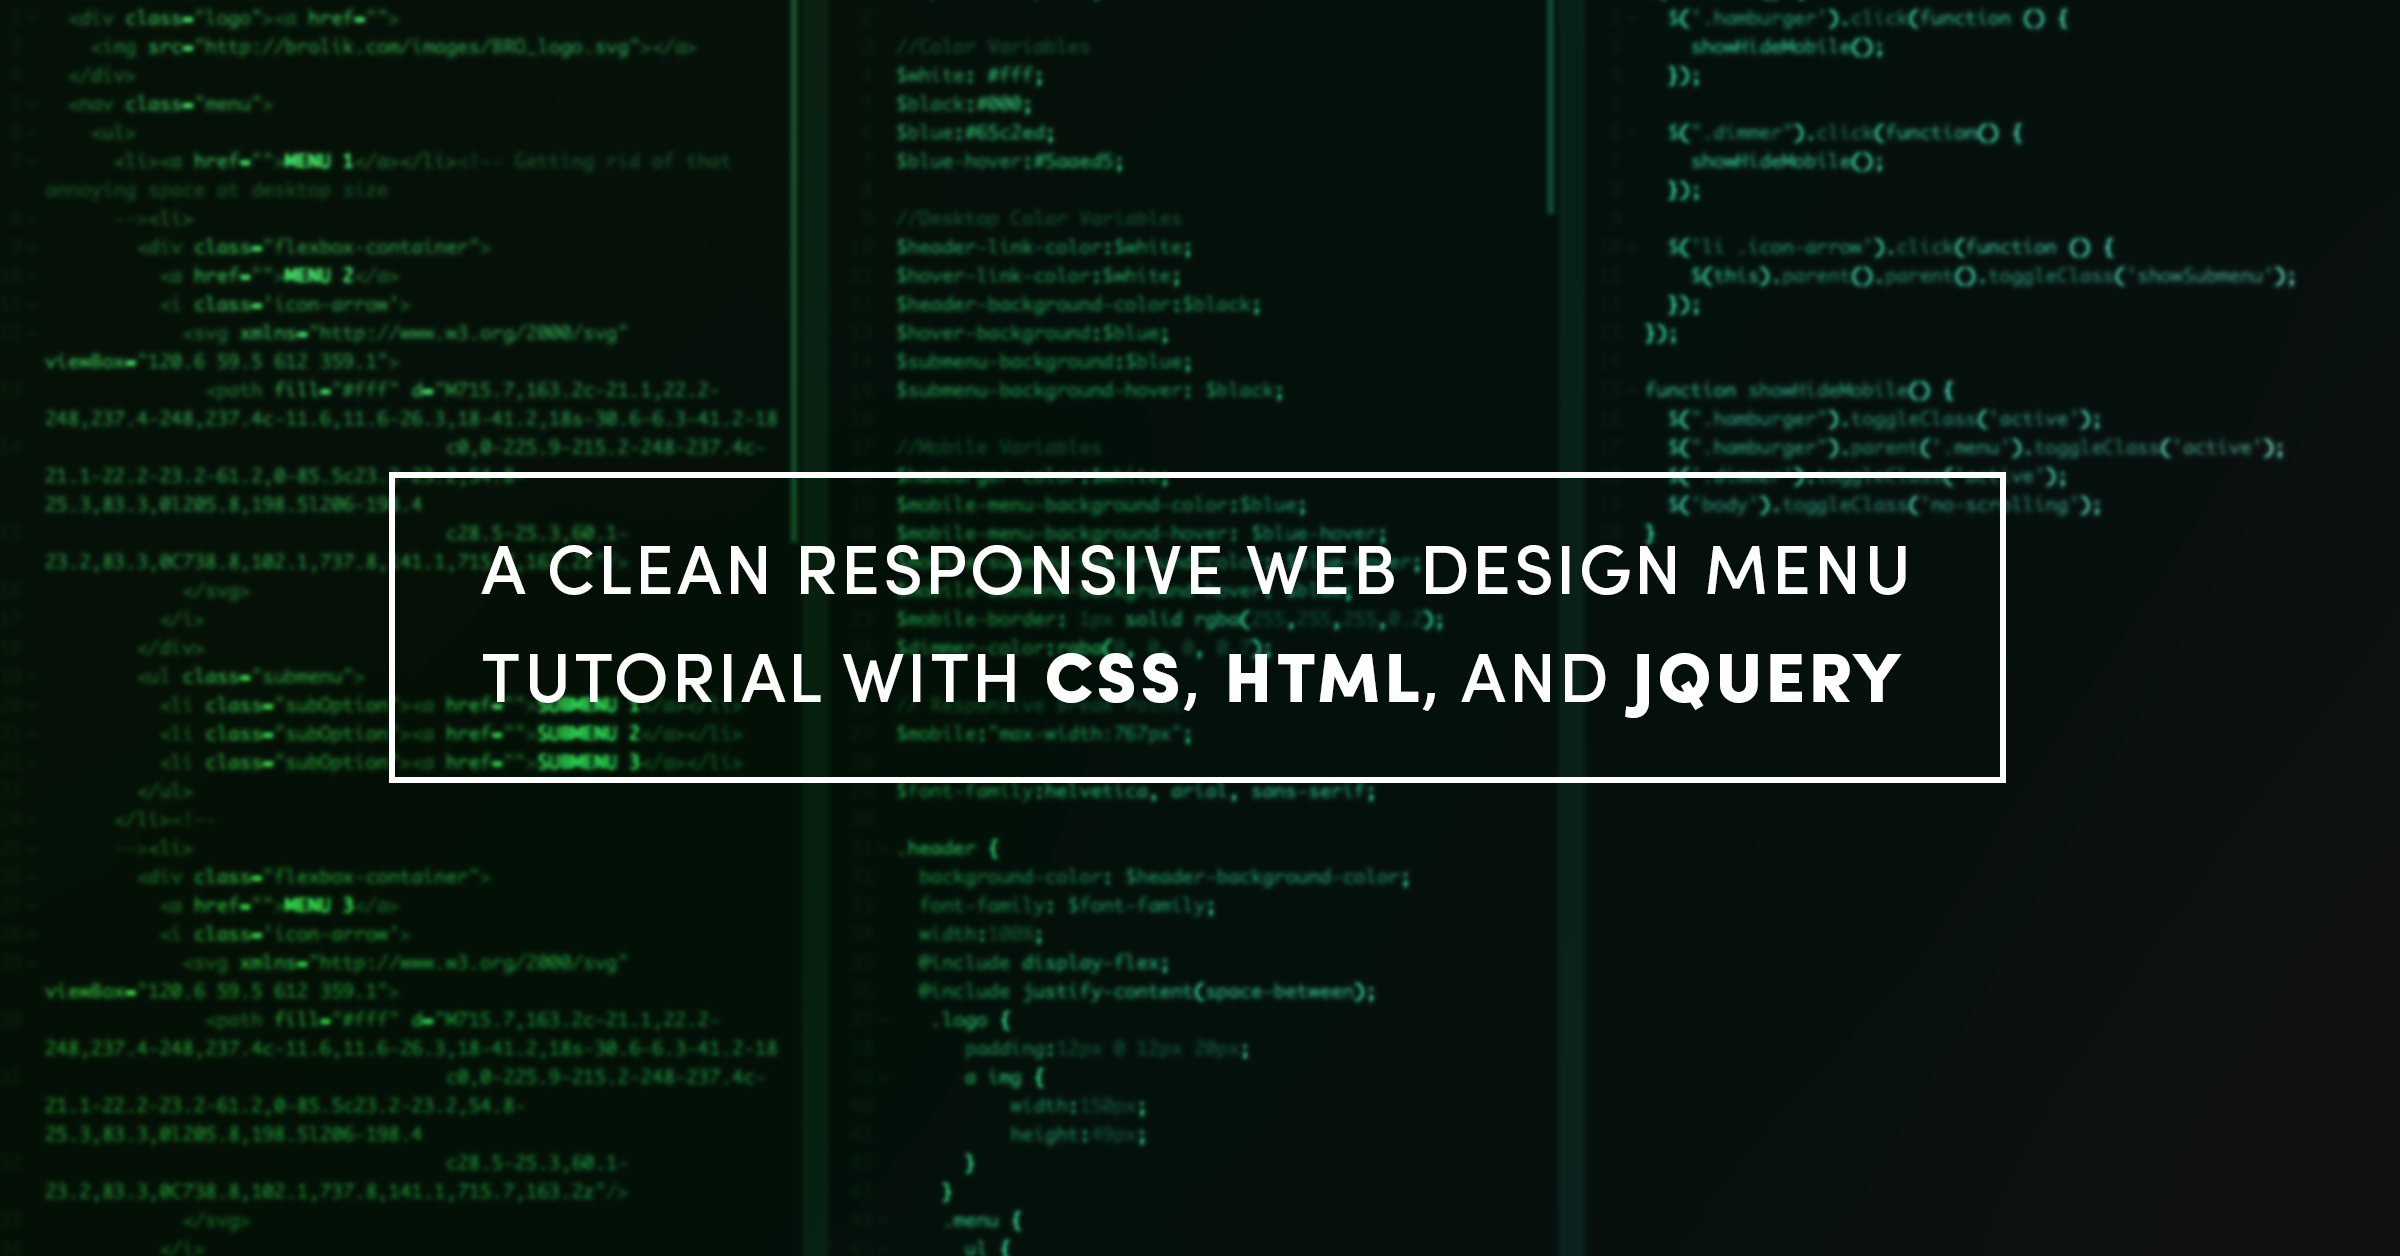 A Clean Responsive Web Design Menu Tutorial with CSS, HTML, and jQuery